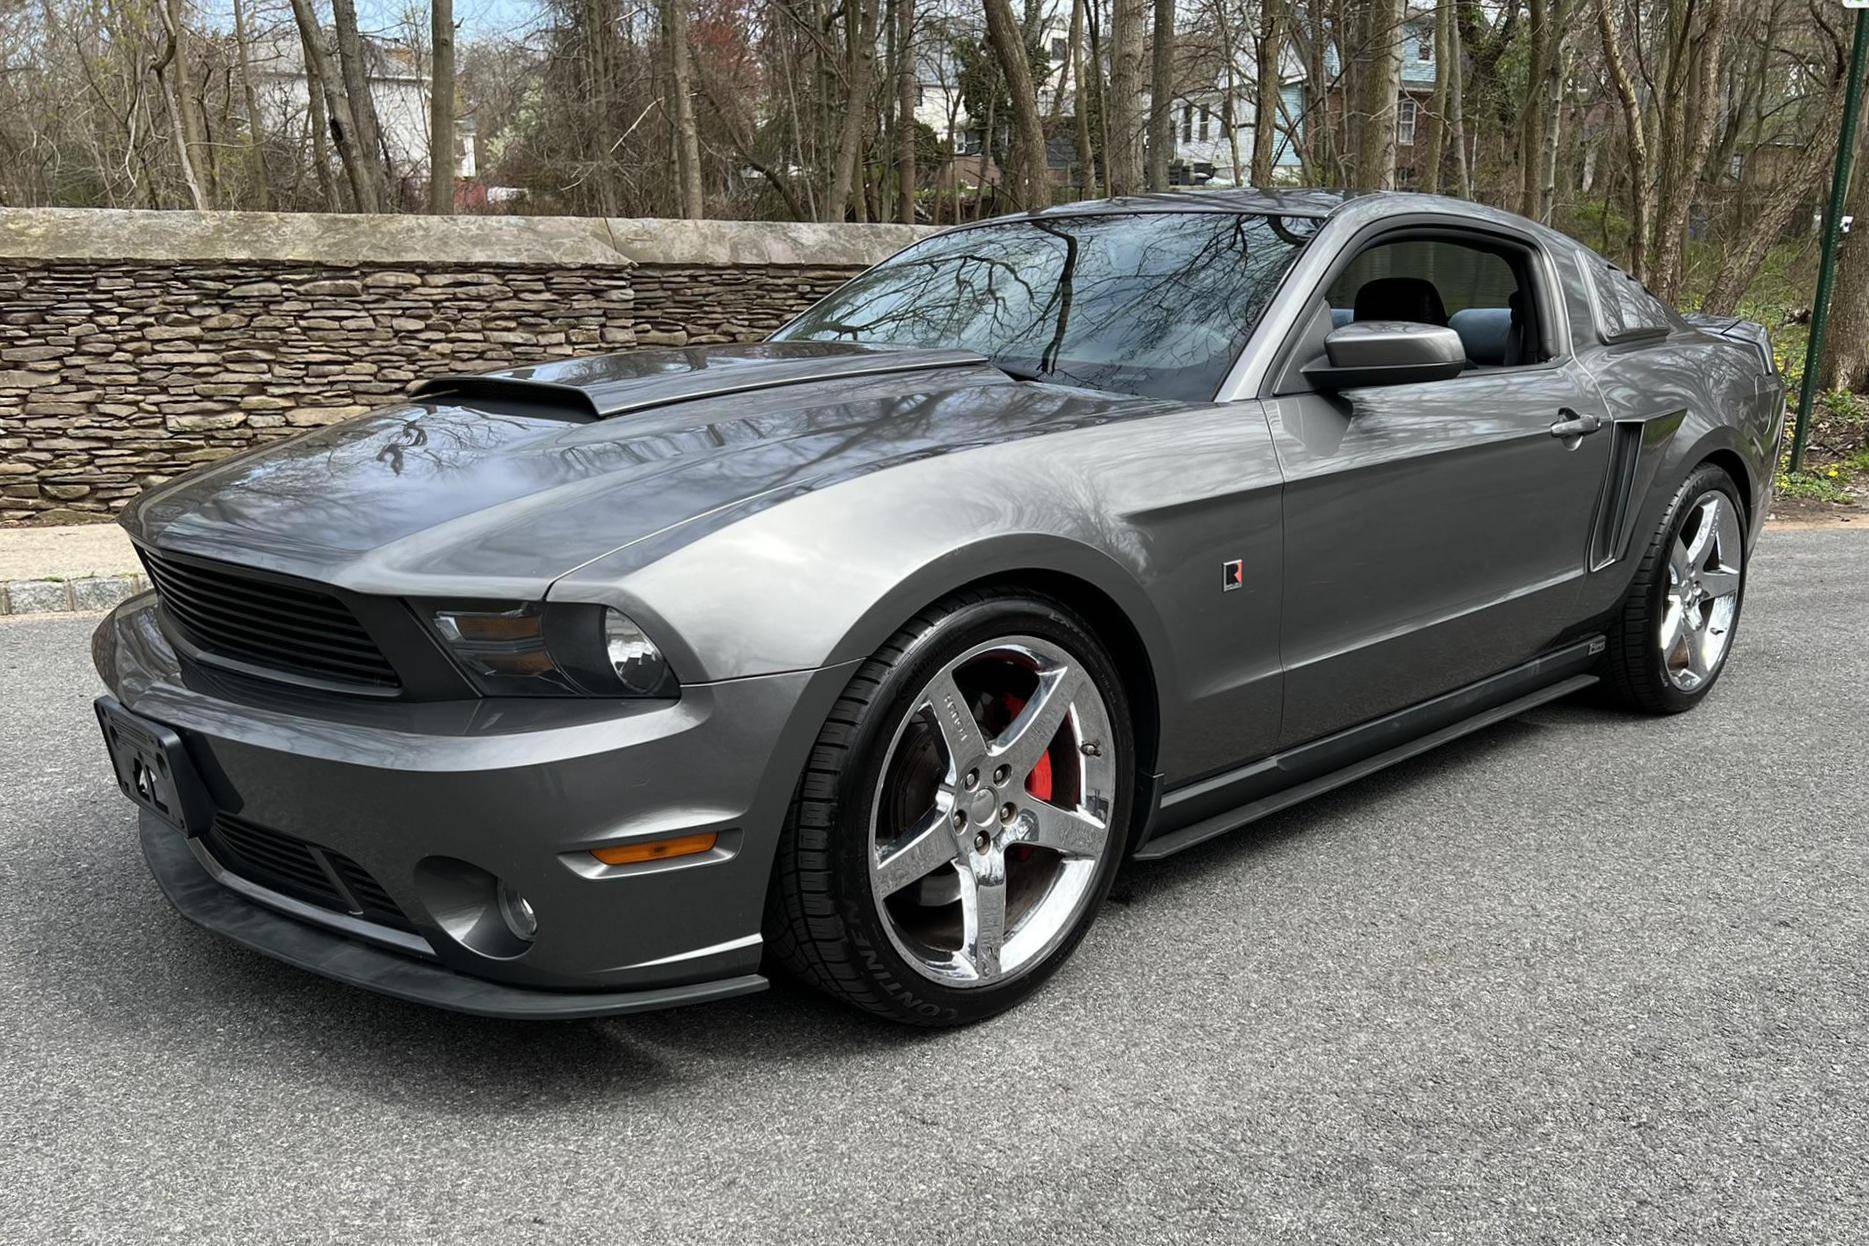 2015 Roush Mustang: Even More Agression - The Car Guide